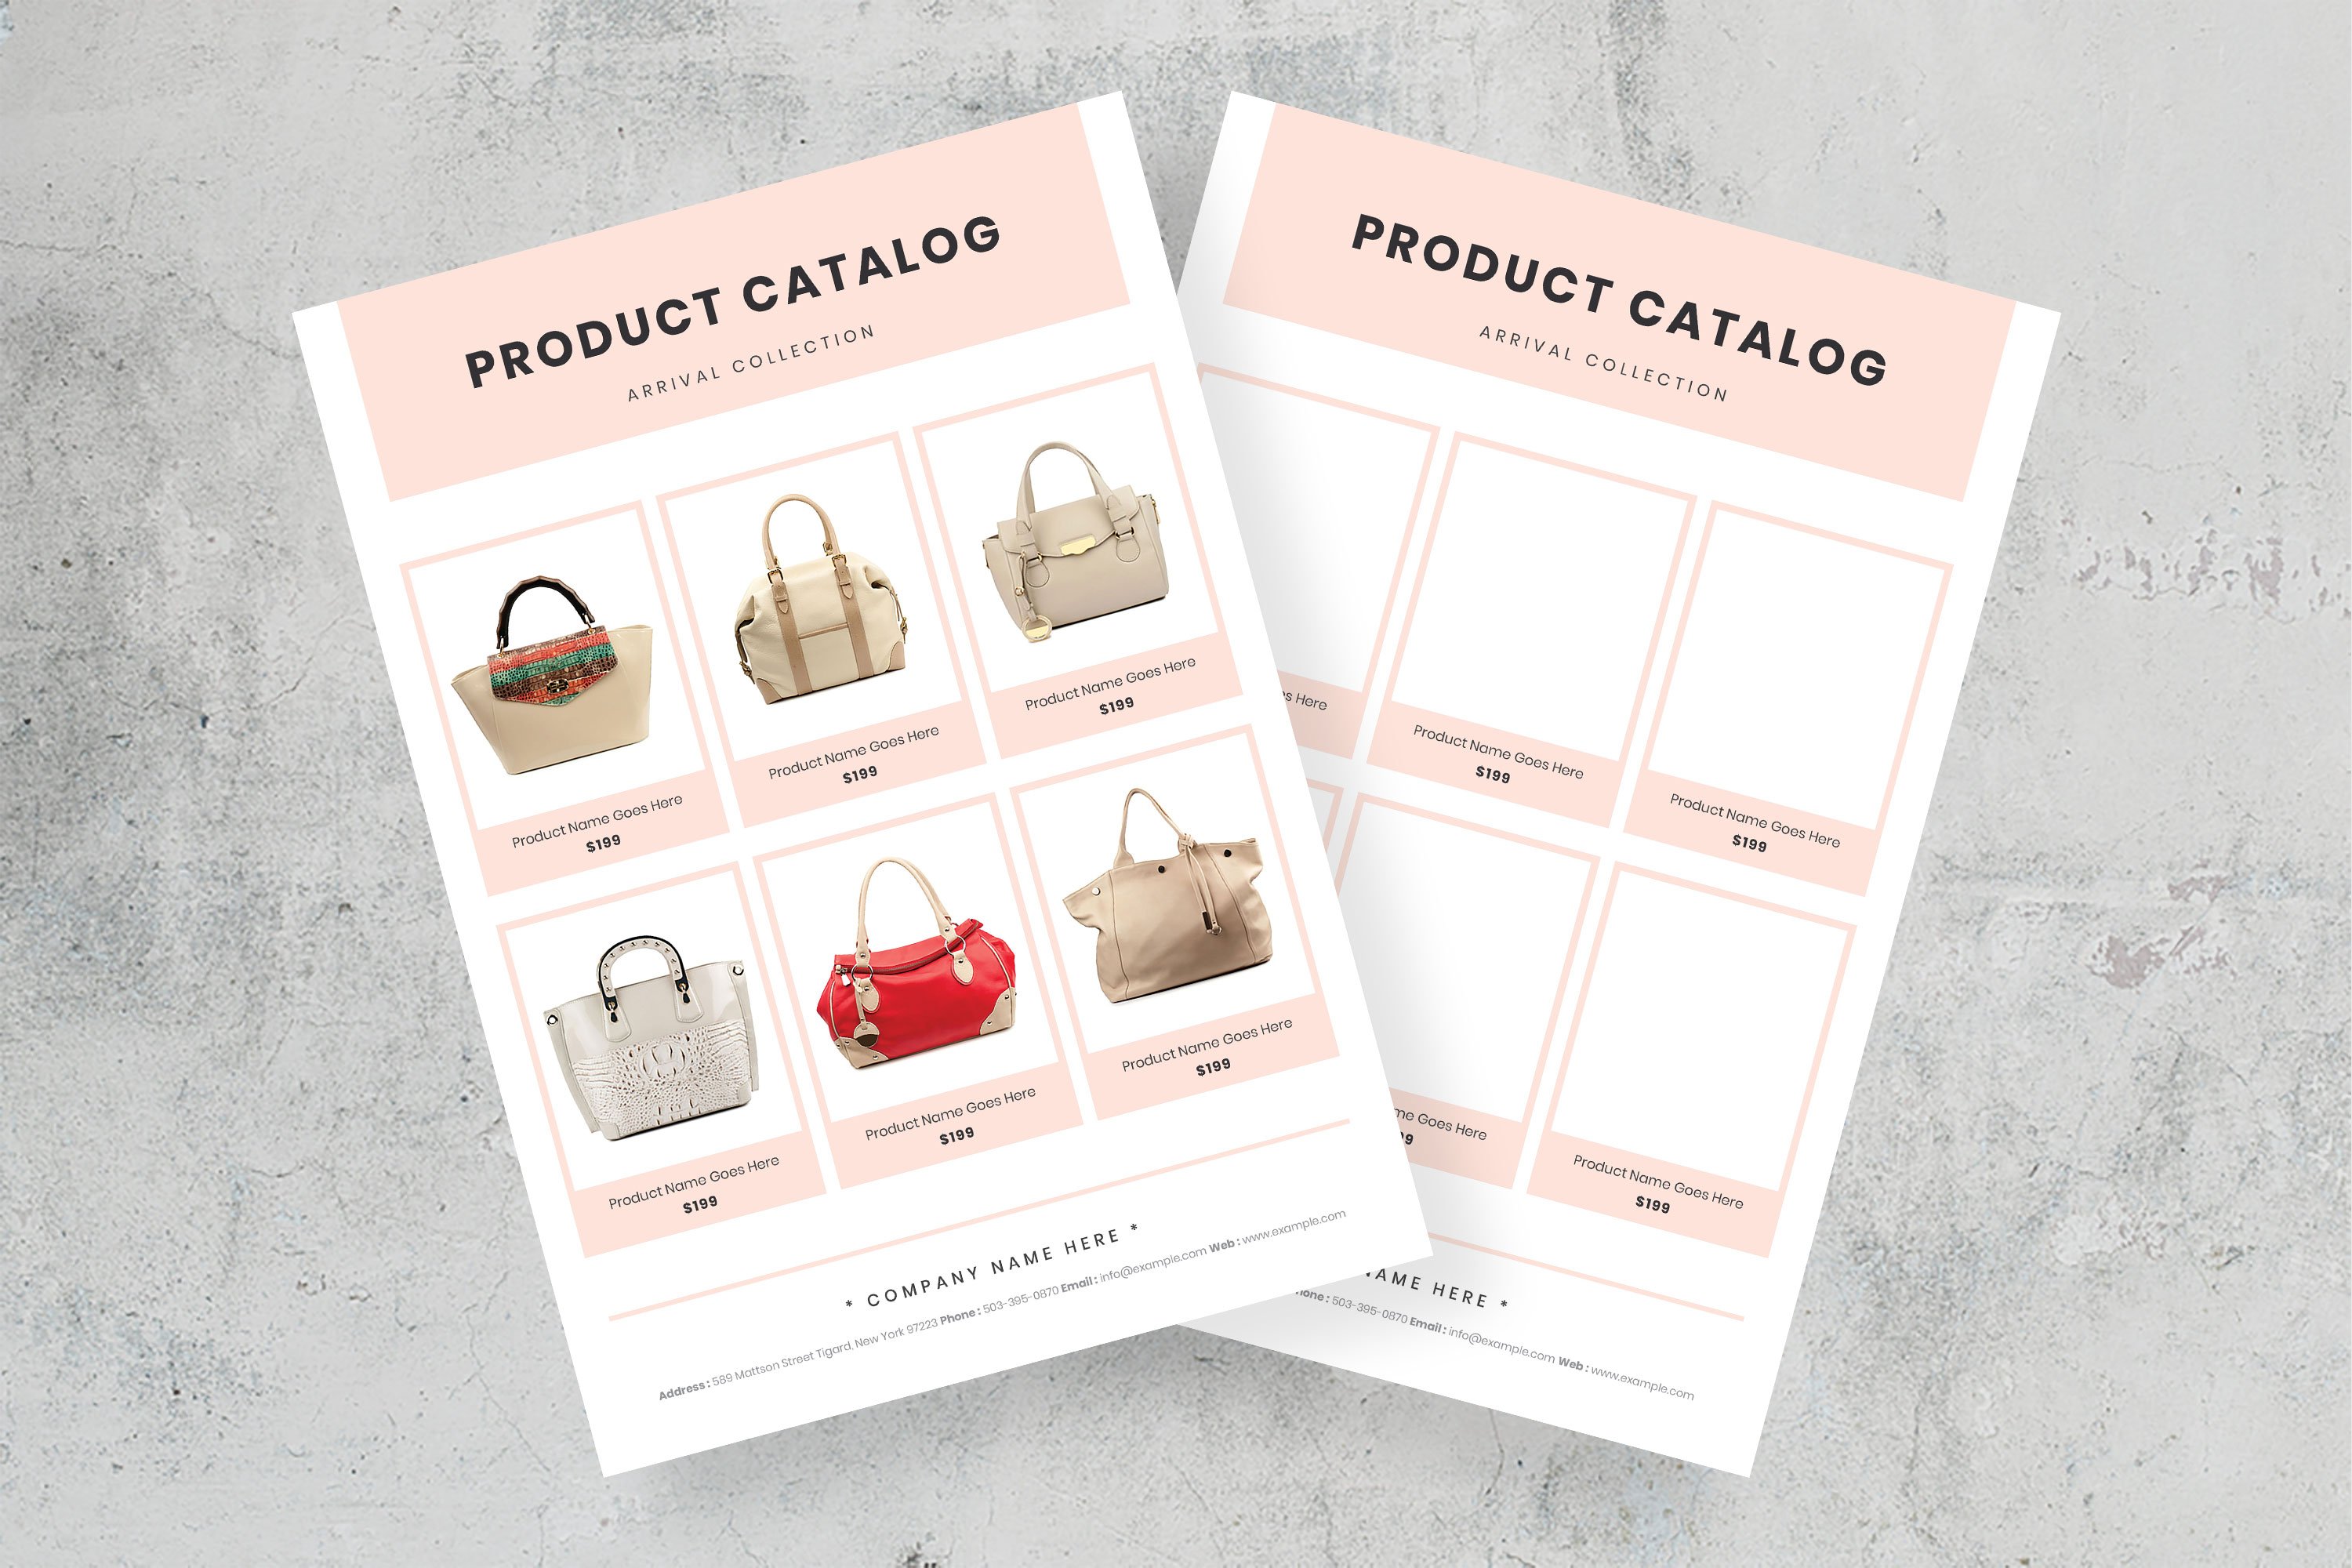 Minimal Product Catalog Template cover image.